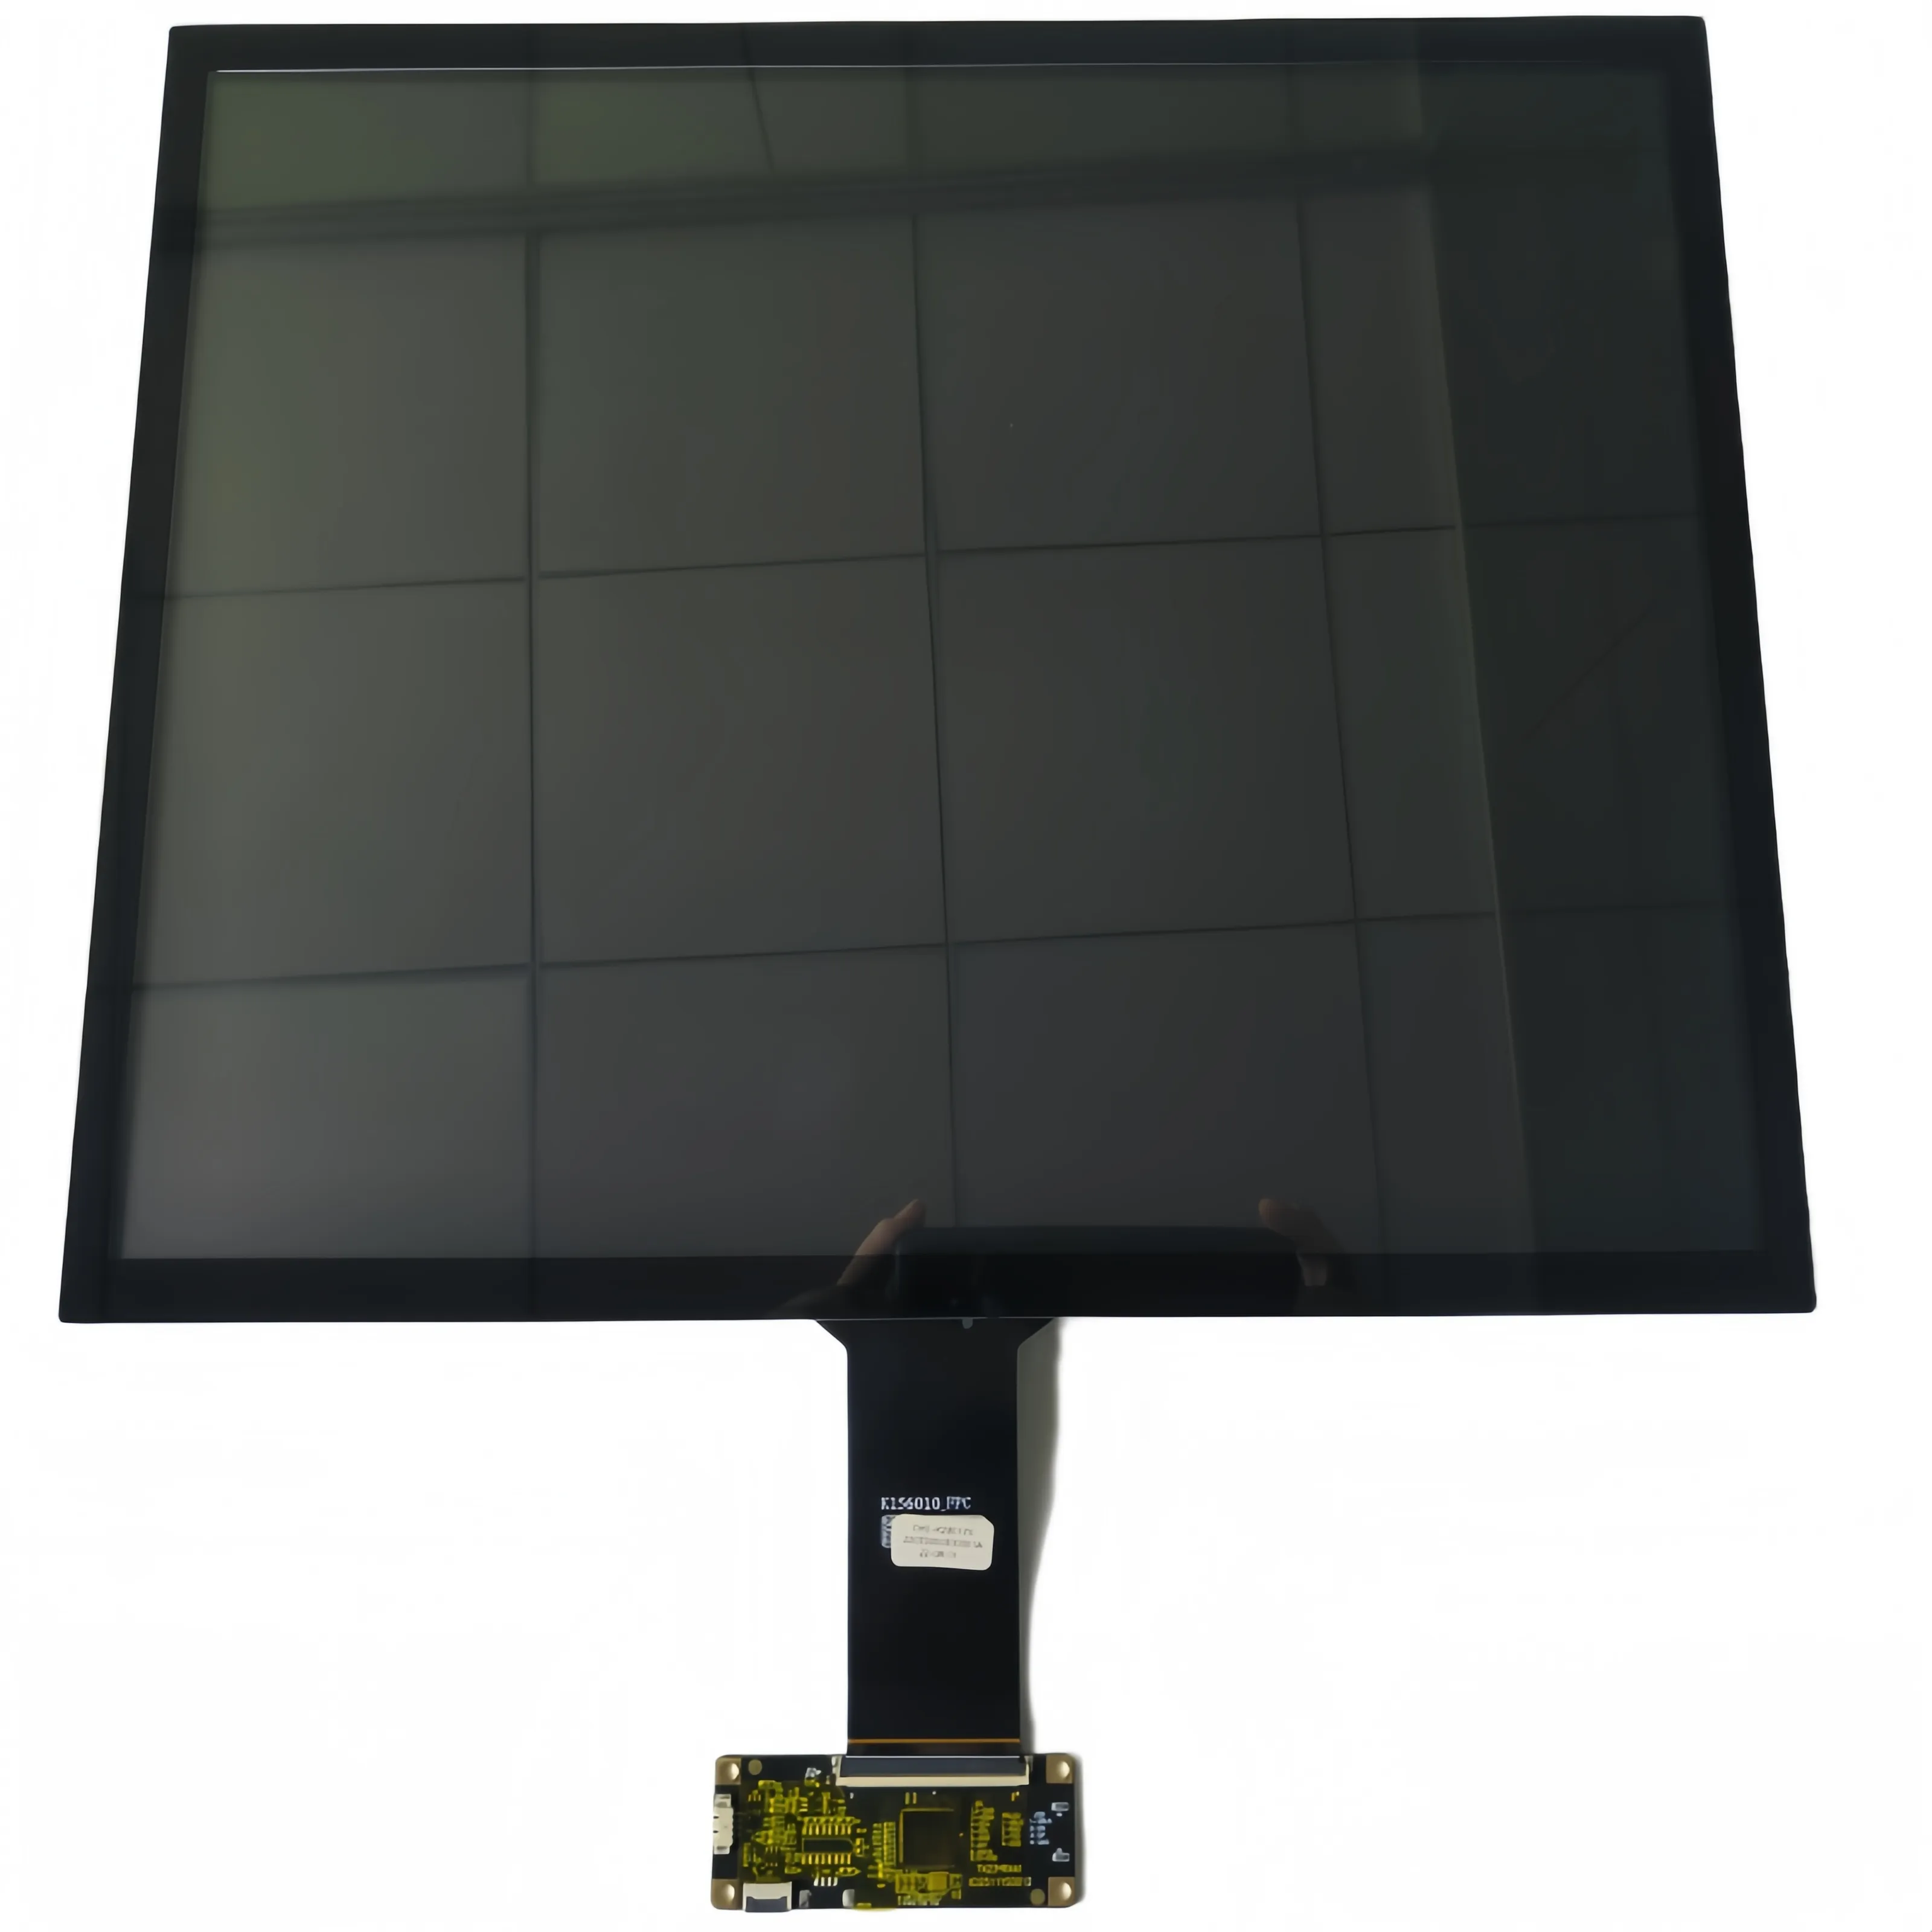 OKE 17 inch Interactive Embedded PCAP Touch Screen panel Tempered Glass Commercial Digital Signage Displays